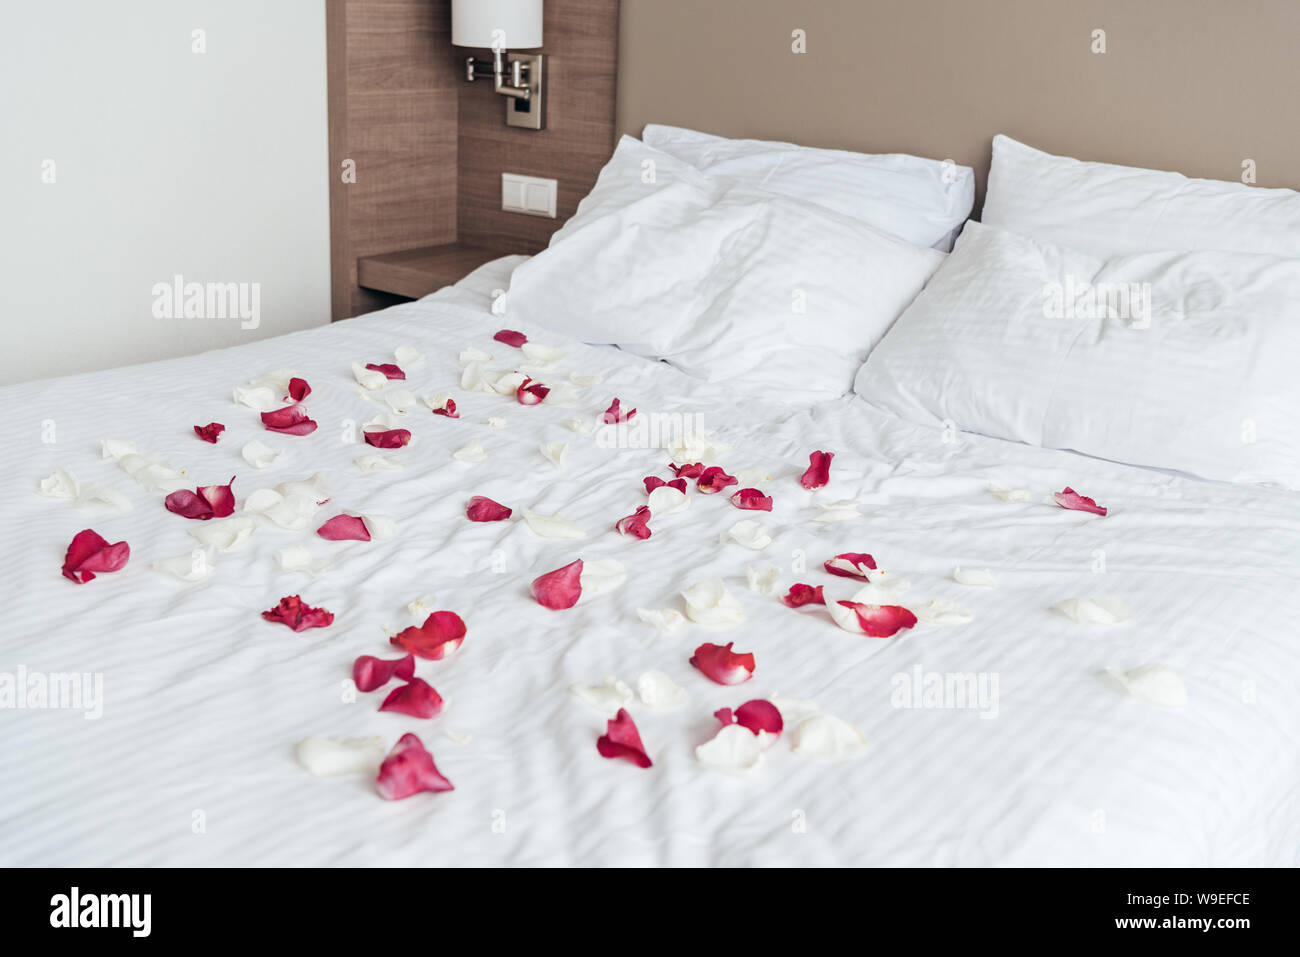 white and pink rose petals on white sheet on bed in bedroom Stock Photo